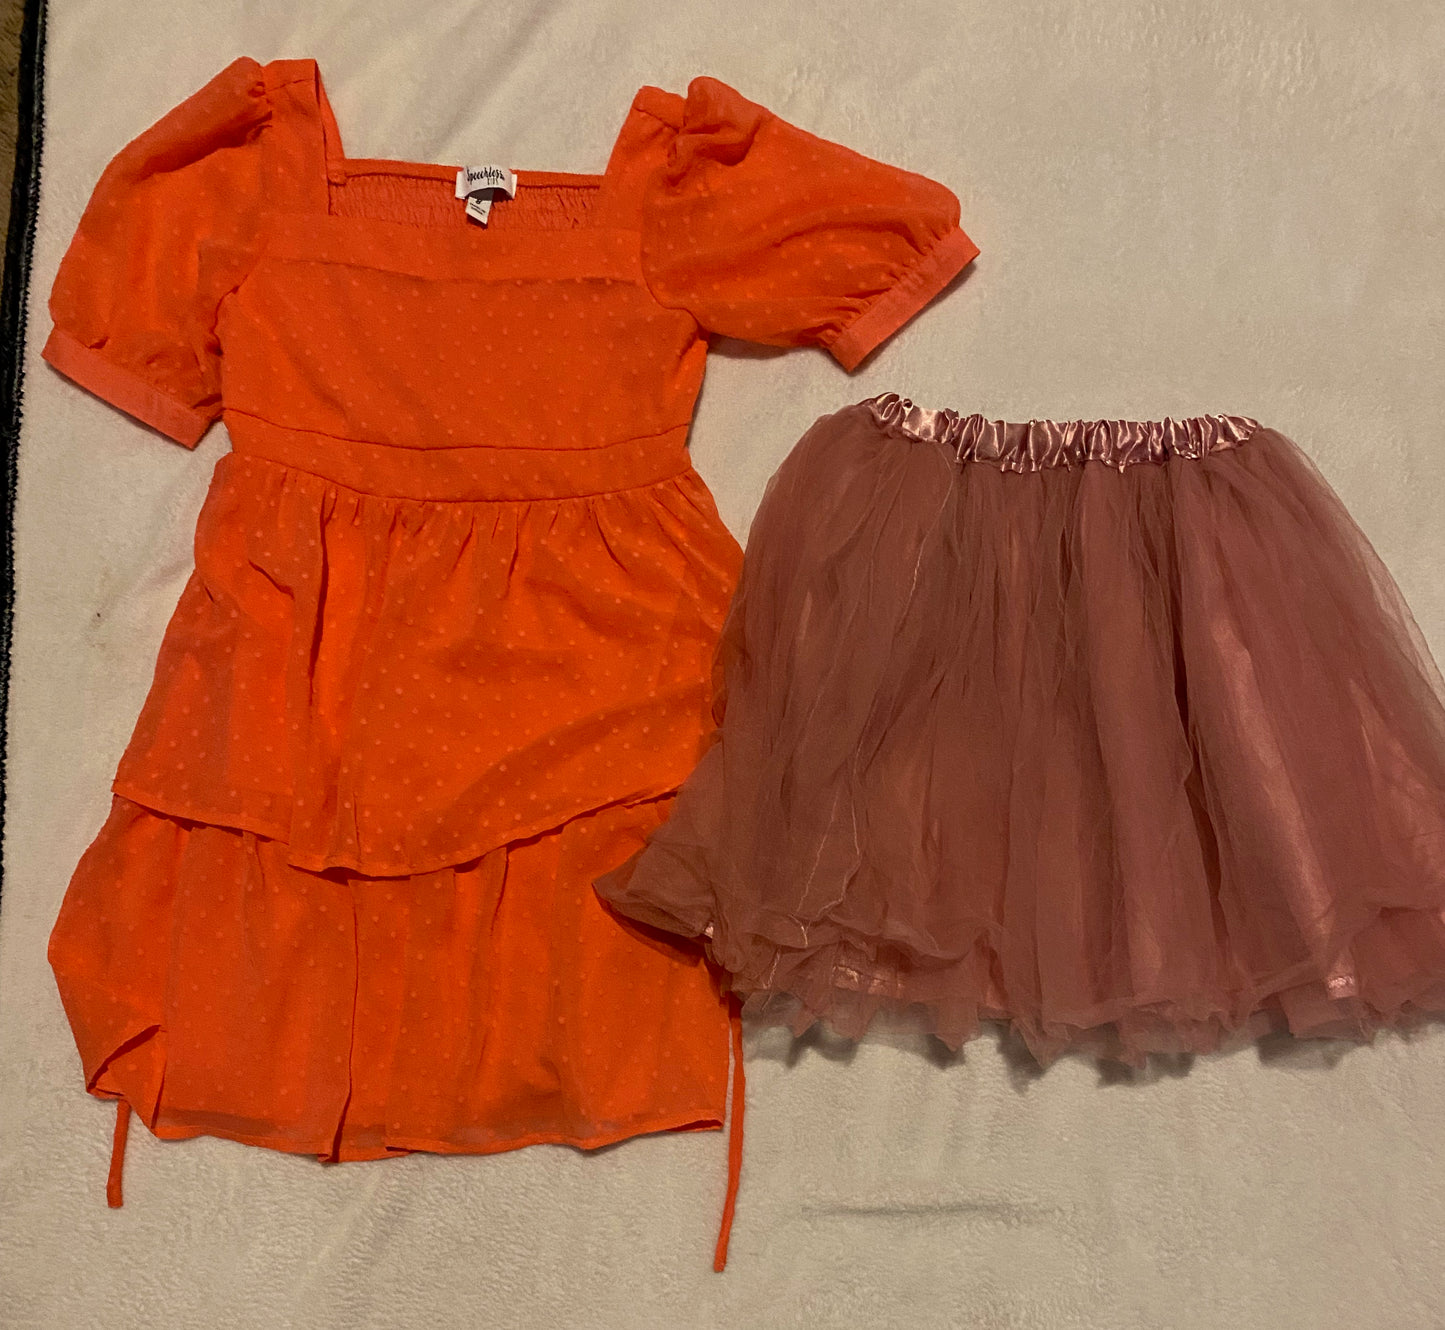 Size 8 coral dress with raised "polka dots" + size 6-8 pink tulle skirt